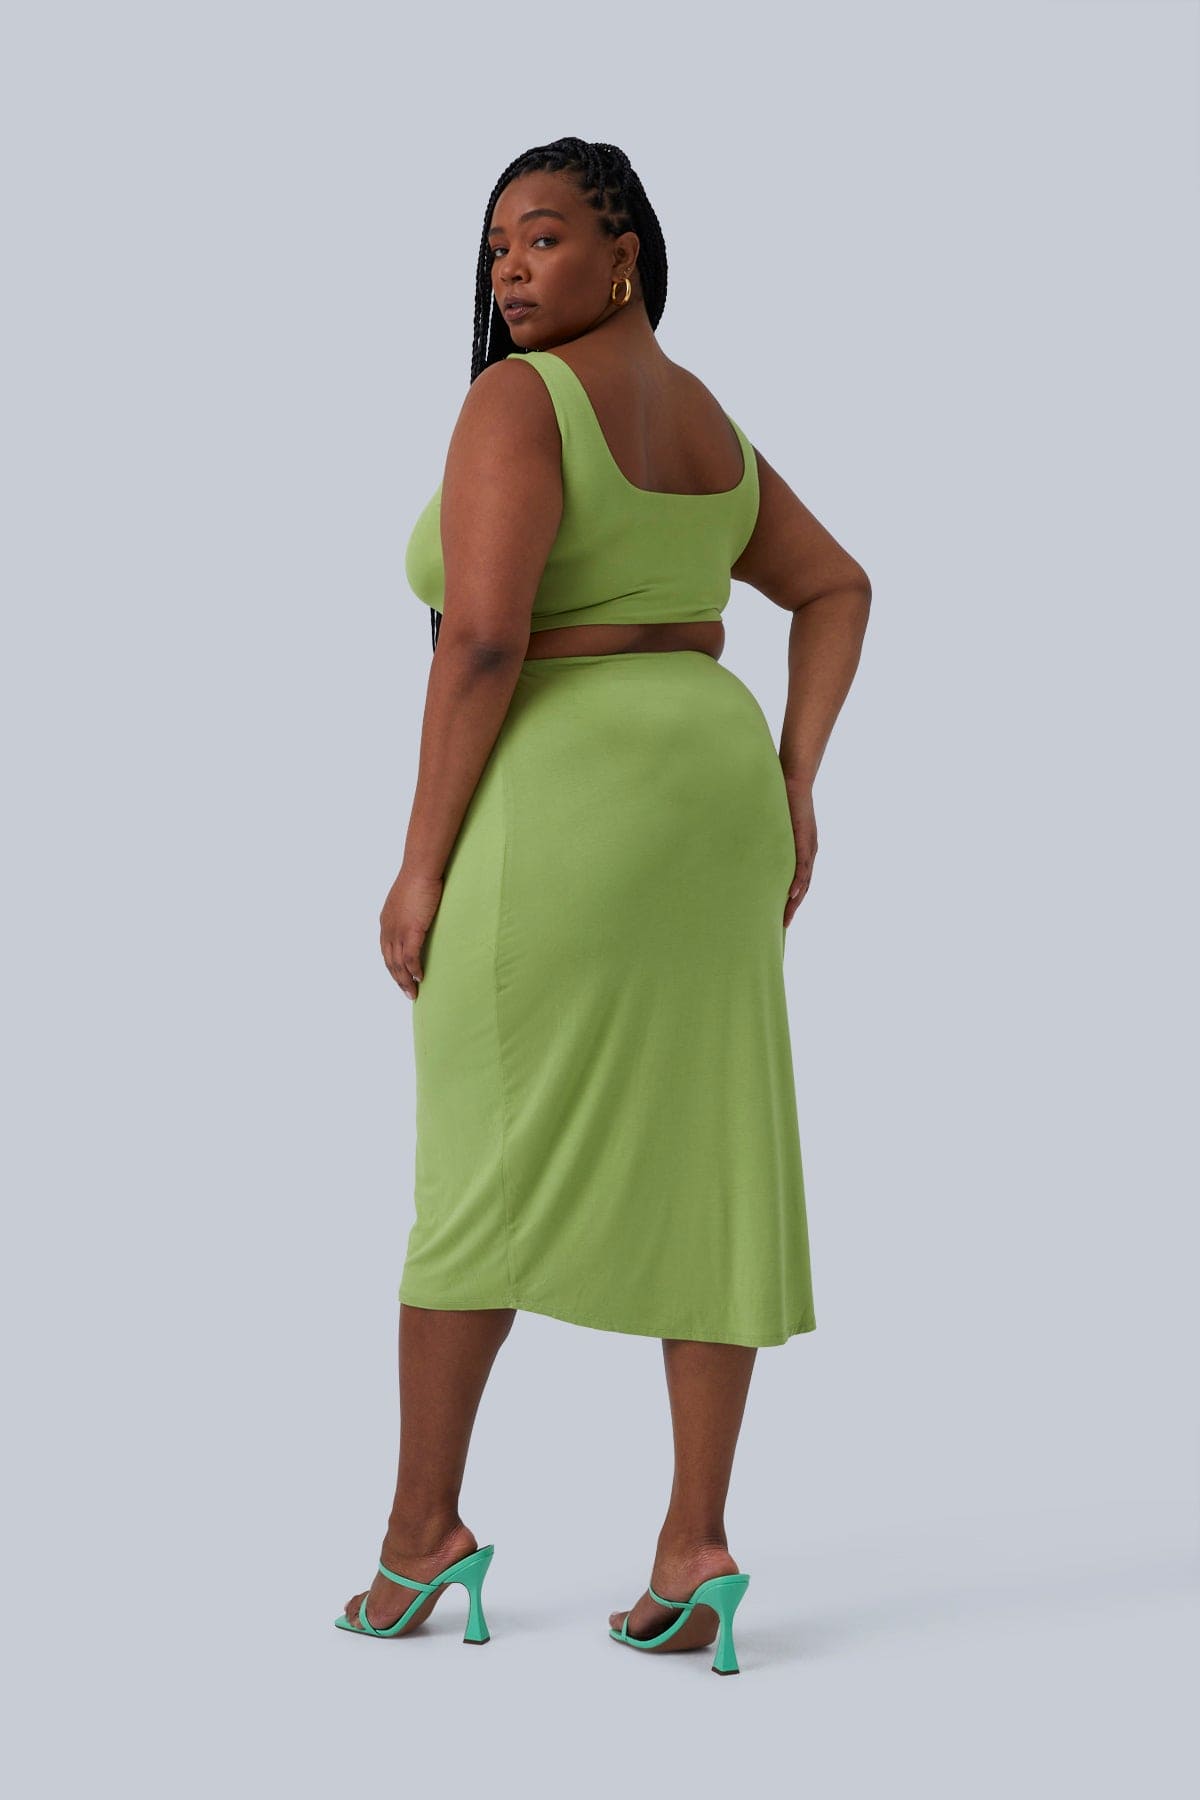 Back view of the Gigi Midi Dress with two layers of fabric for maximum shape for women with curves. Model is looking over her shoulder towards camera. Dress by Gia IRL Plus Size Boutique size 1X.